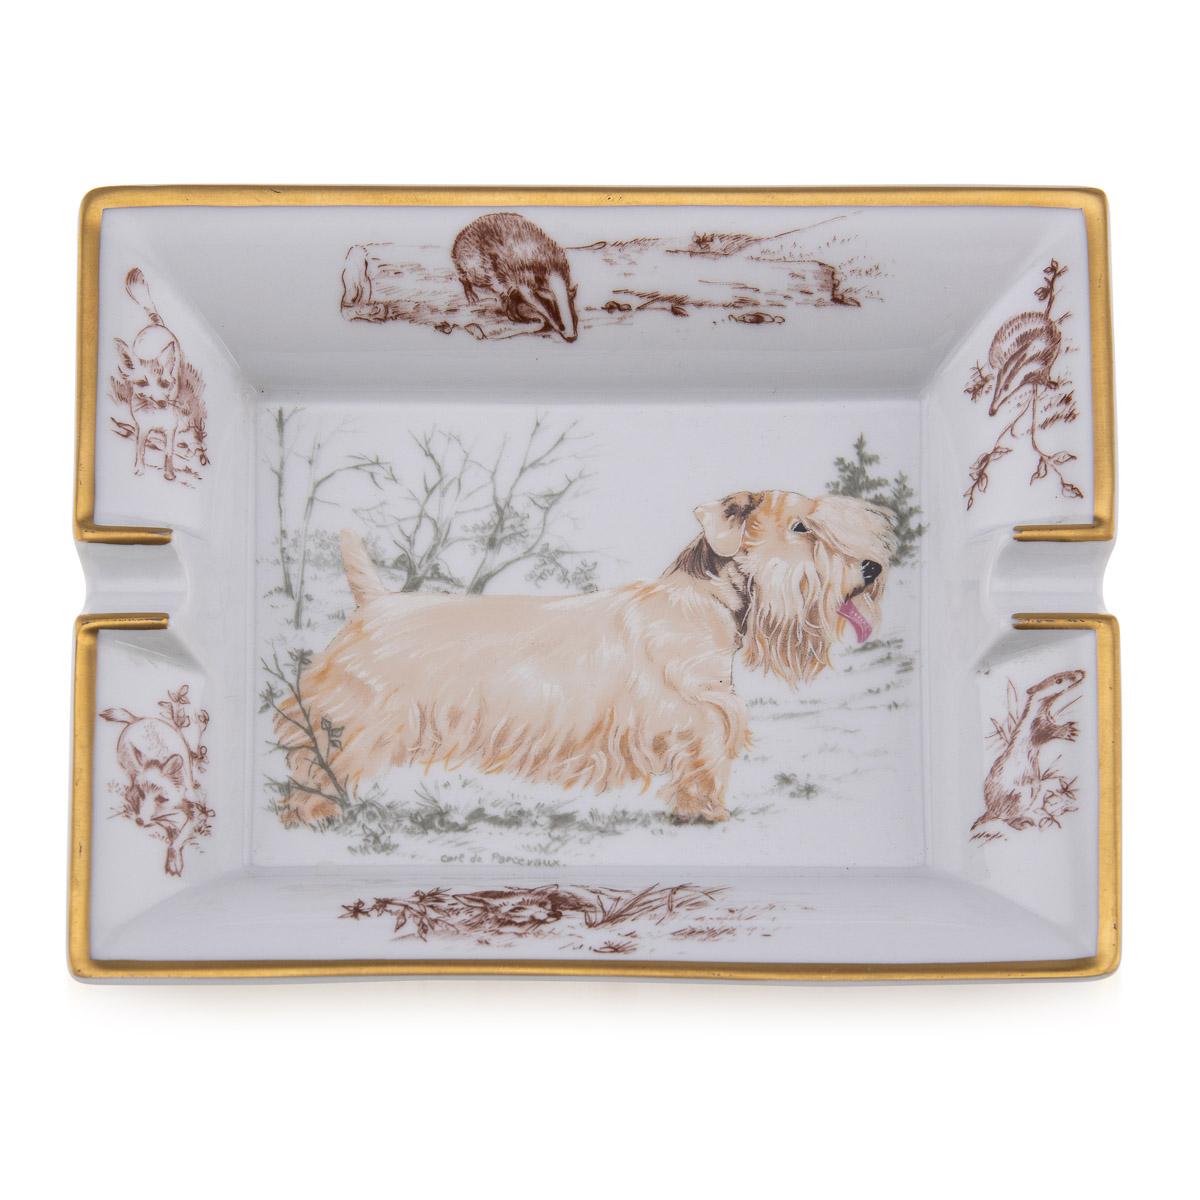 A ceramic ashtray by Hermes, made in France in the latter half of the 20th century. These ashtrays have always been very collectable with the vintage models in particular. This one has a lovely dog theme but at the same time typically Hermes; a